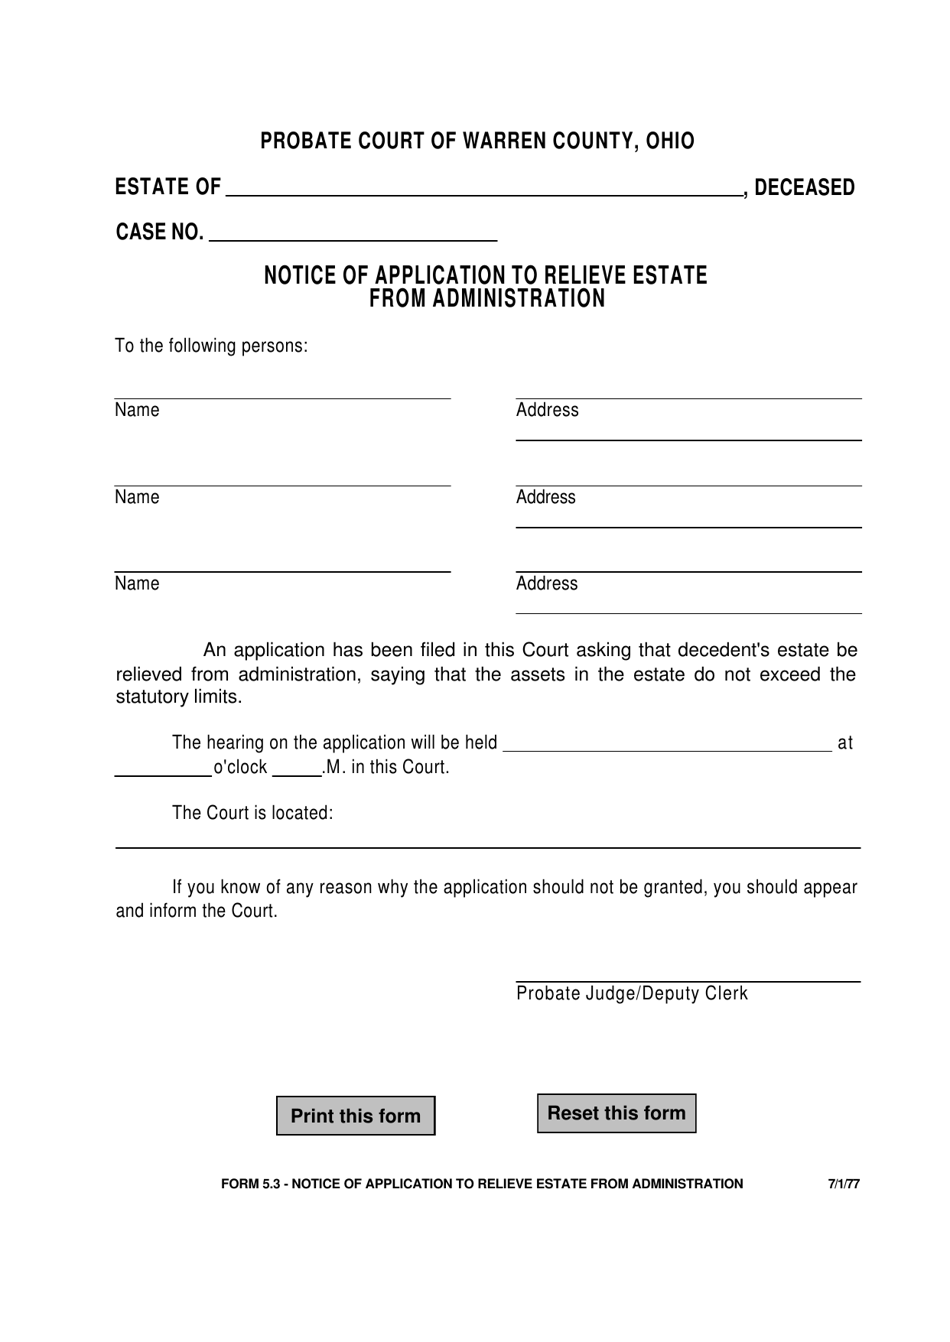 Form 5.3 Notice of Application to Relieve Estate From Administration - Warren County, Ohio, Page 1